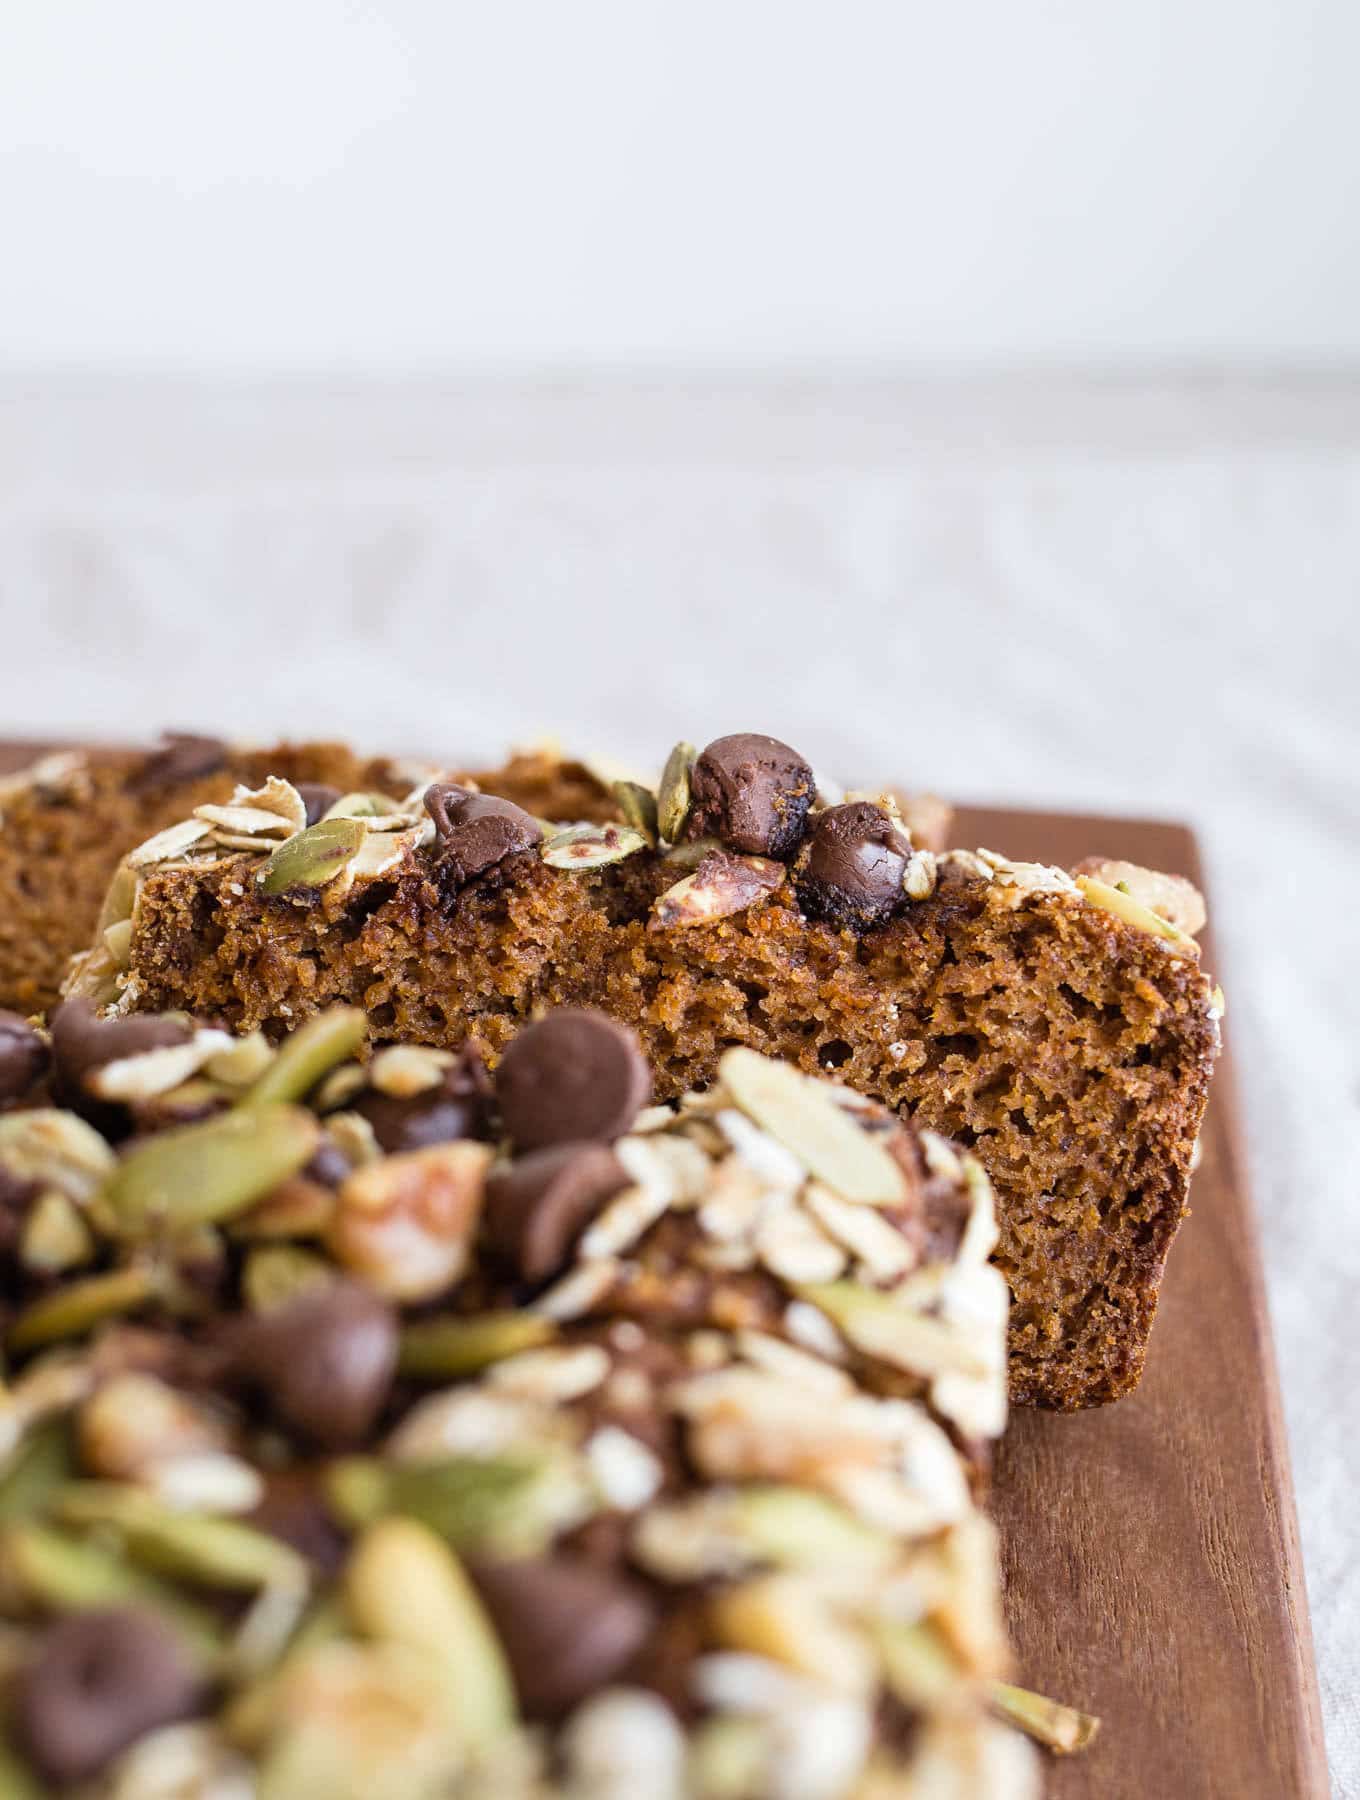 Healthy Sweet Potato Bread made with almond and oat flours, sweetened with maple syrup and sweet potato puree, warming spices, and topped with seeds, nuts, and chocolate chips. Gluten-free, dairy-free.